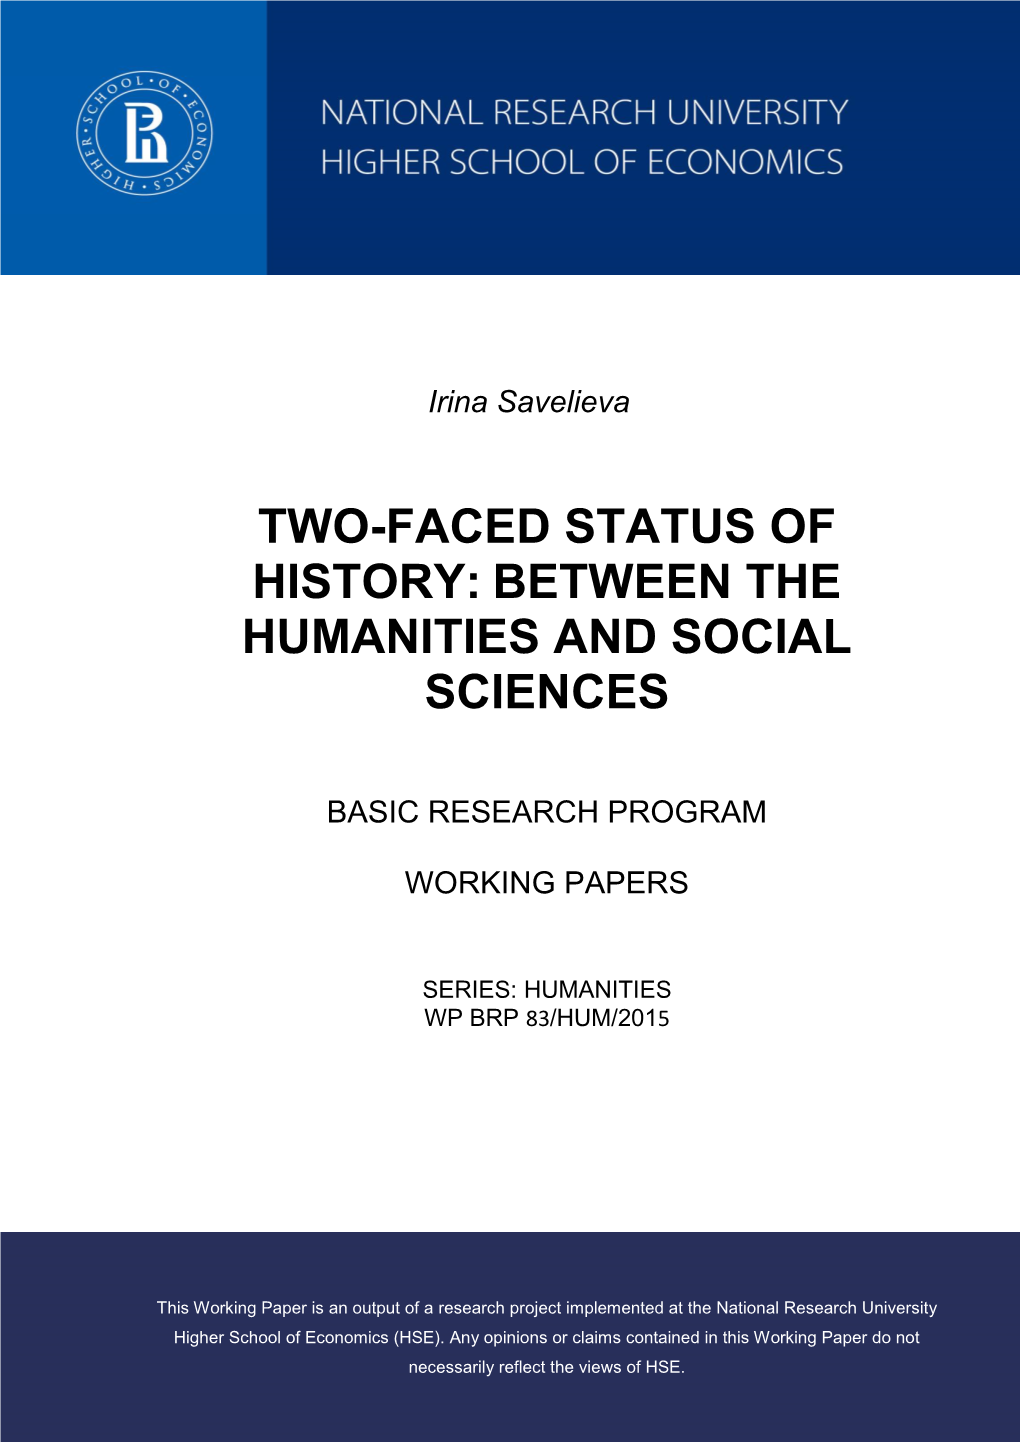 'Two-Faced Status of History: Between the Humanities and Social